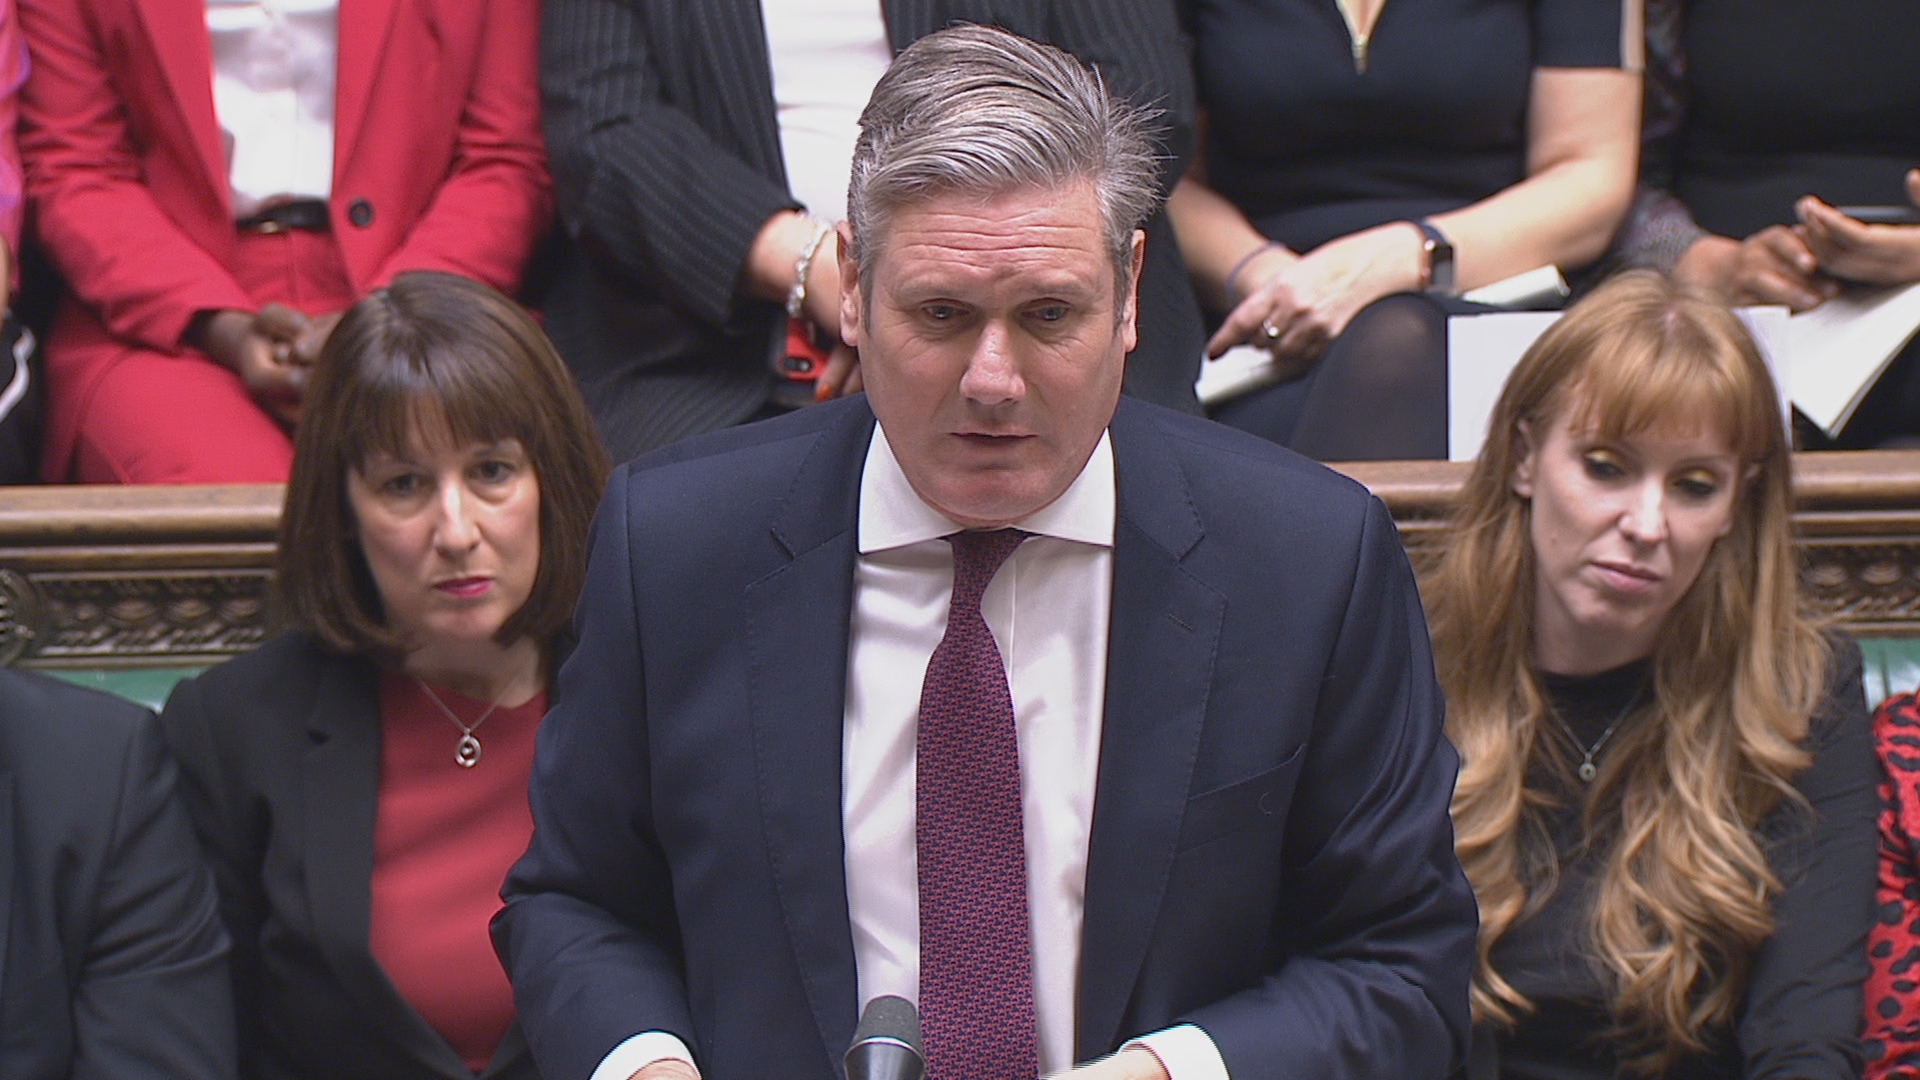 Keir Starmer criticised Truss over the impact of the mini-budget.